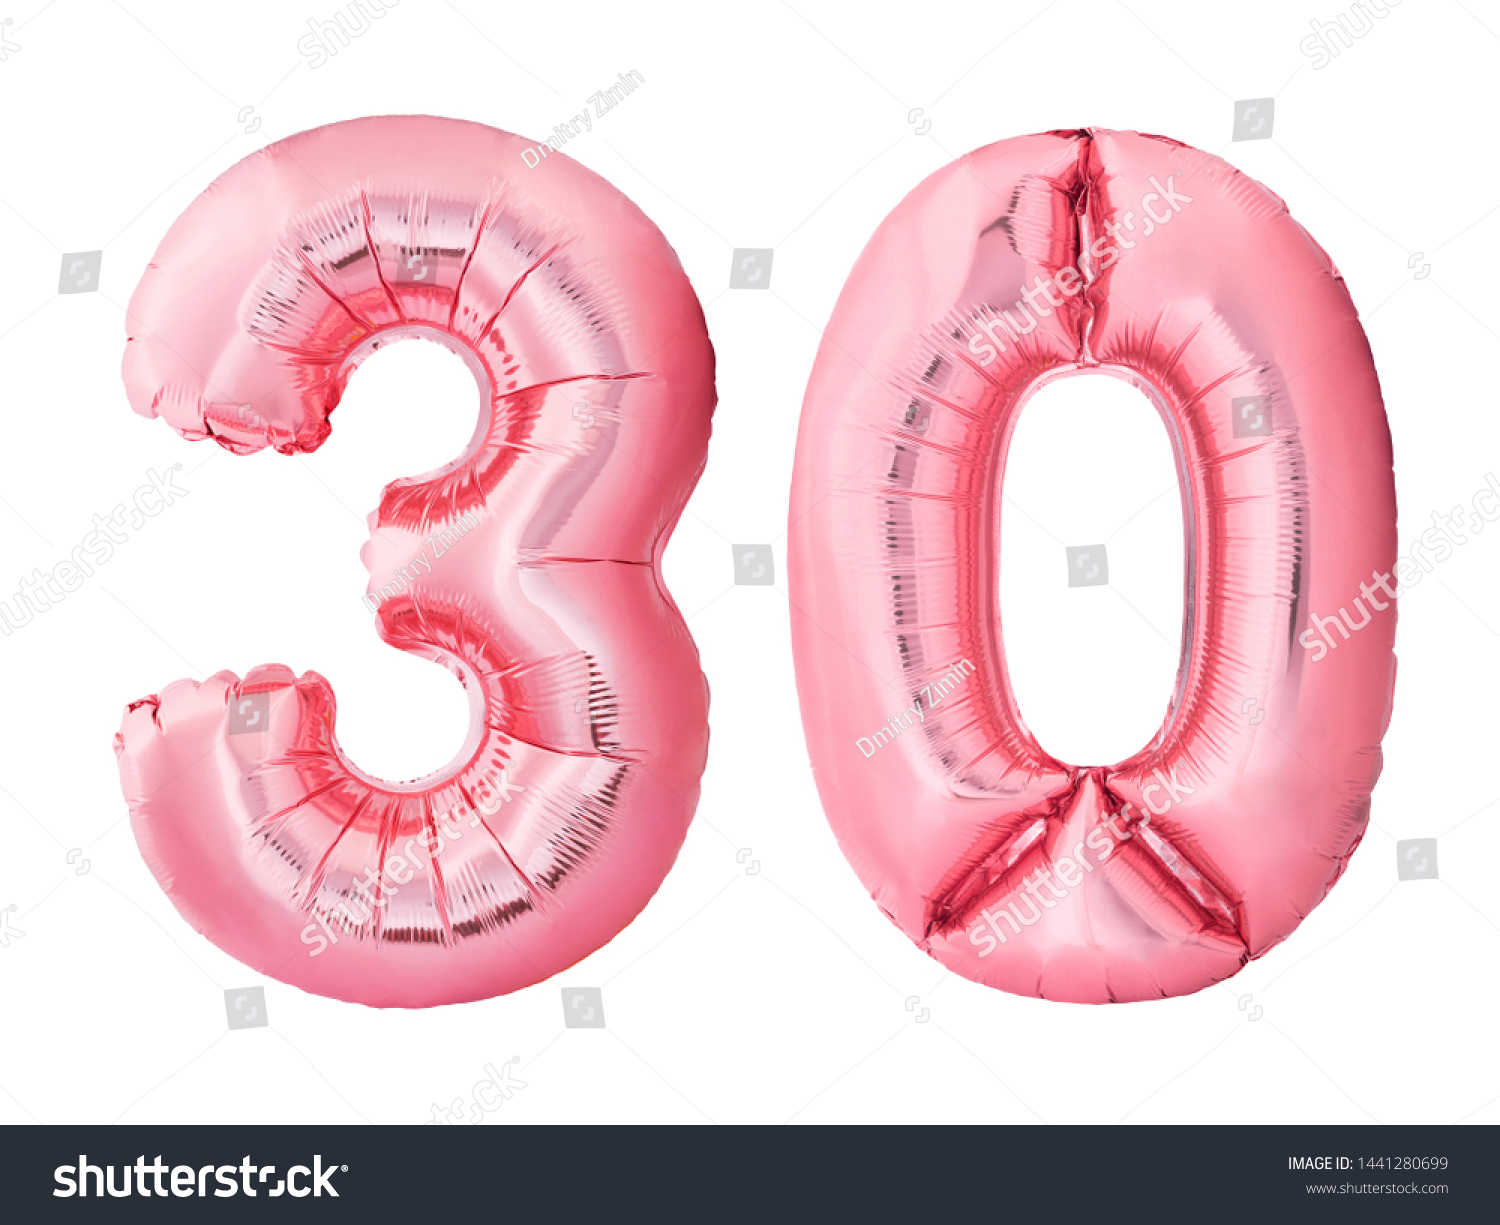 Number 30 thirty made of rose gold inflatable balloons isolated on white background. Pink helium balloons forming 30 thirty number. Discount and sale or birthday concept #1441280699